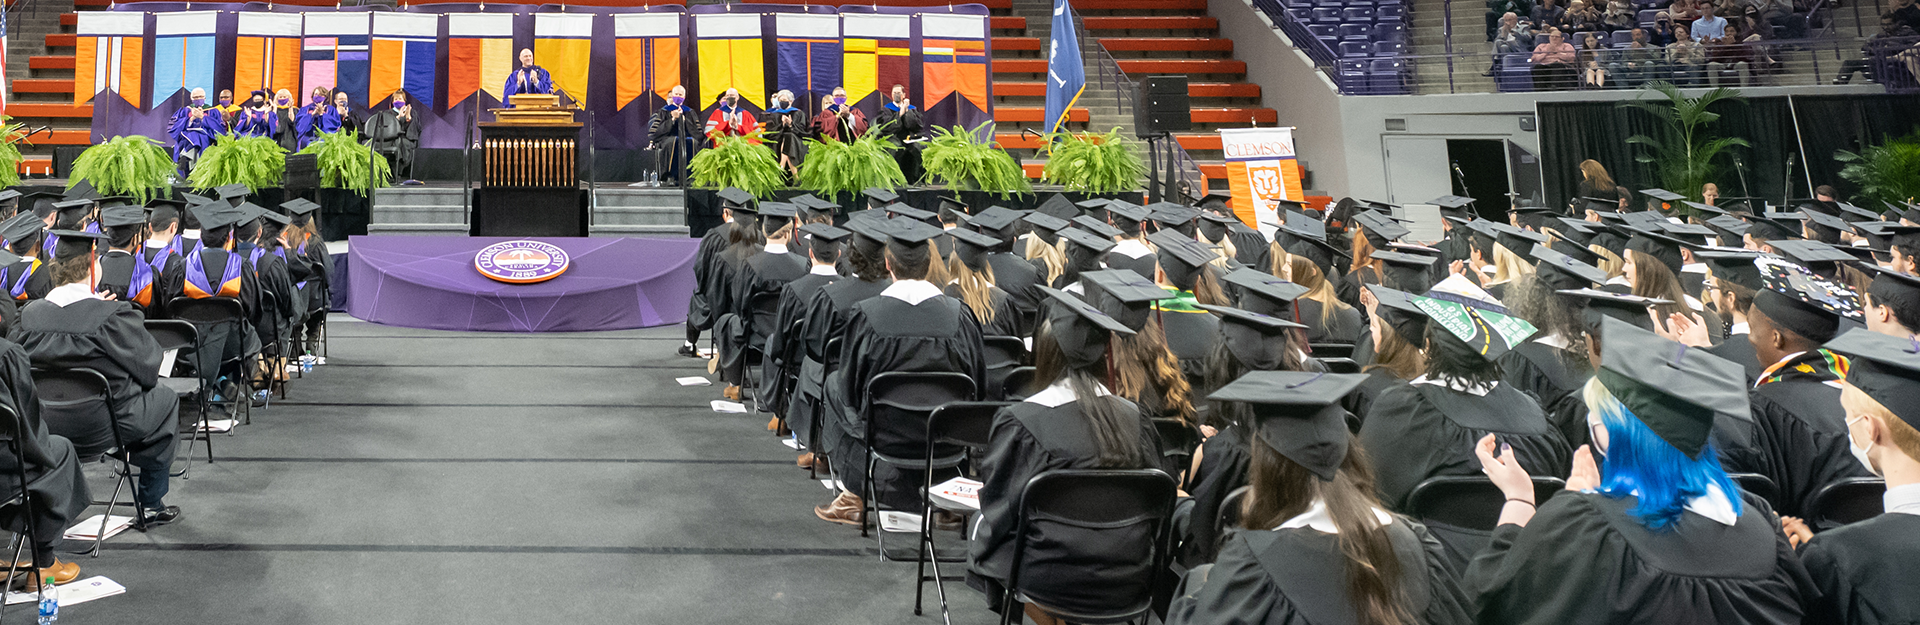 floor view of the stage at clemson commencement 